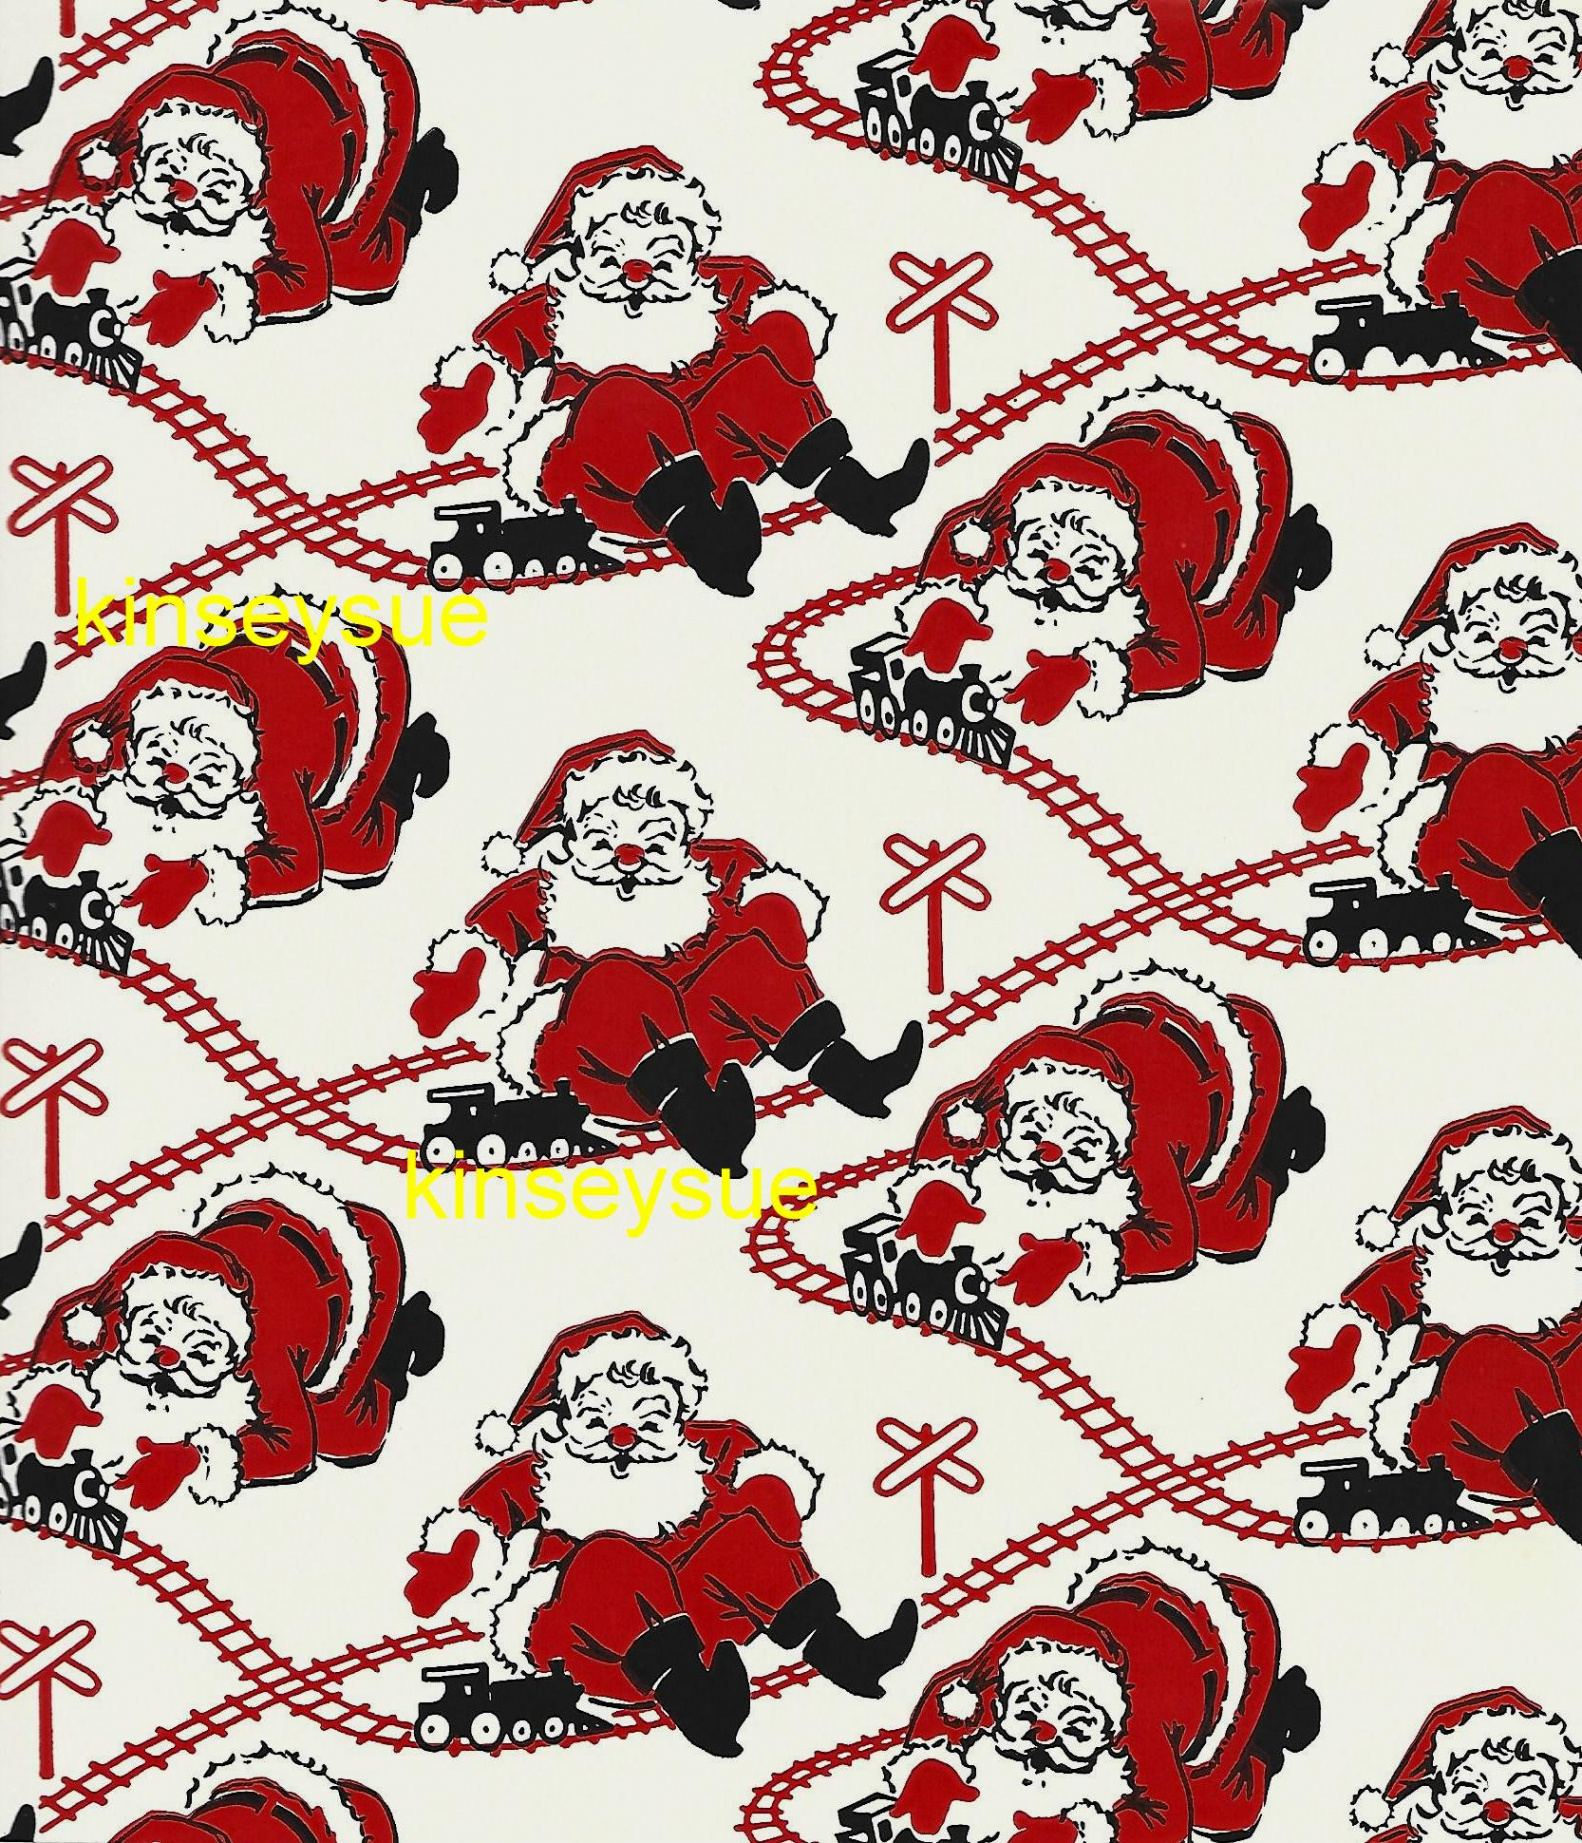 Vintage Christmas Wrapping Paper Santa Playing with Toy Train One Flat  Sheet s-early s Vintage Christmas Gift Wrap